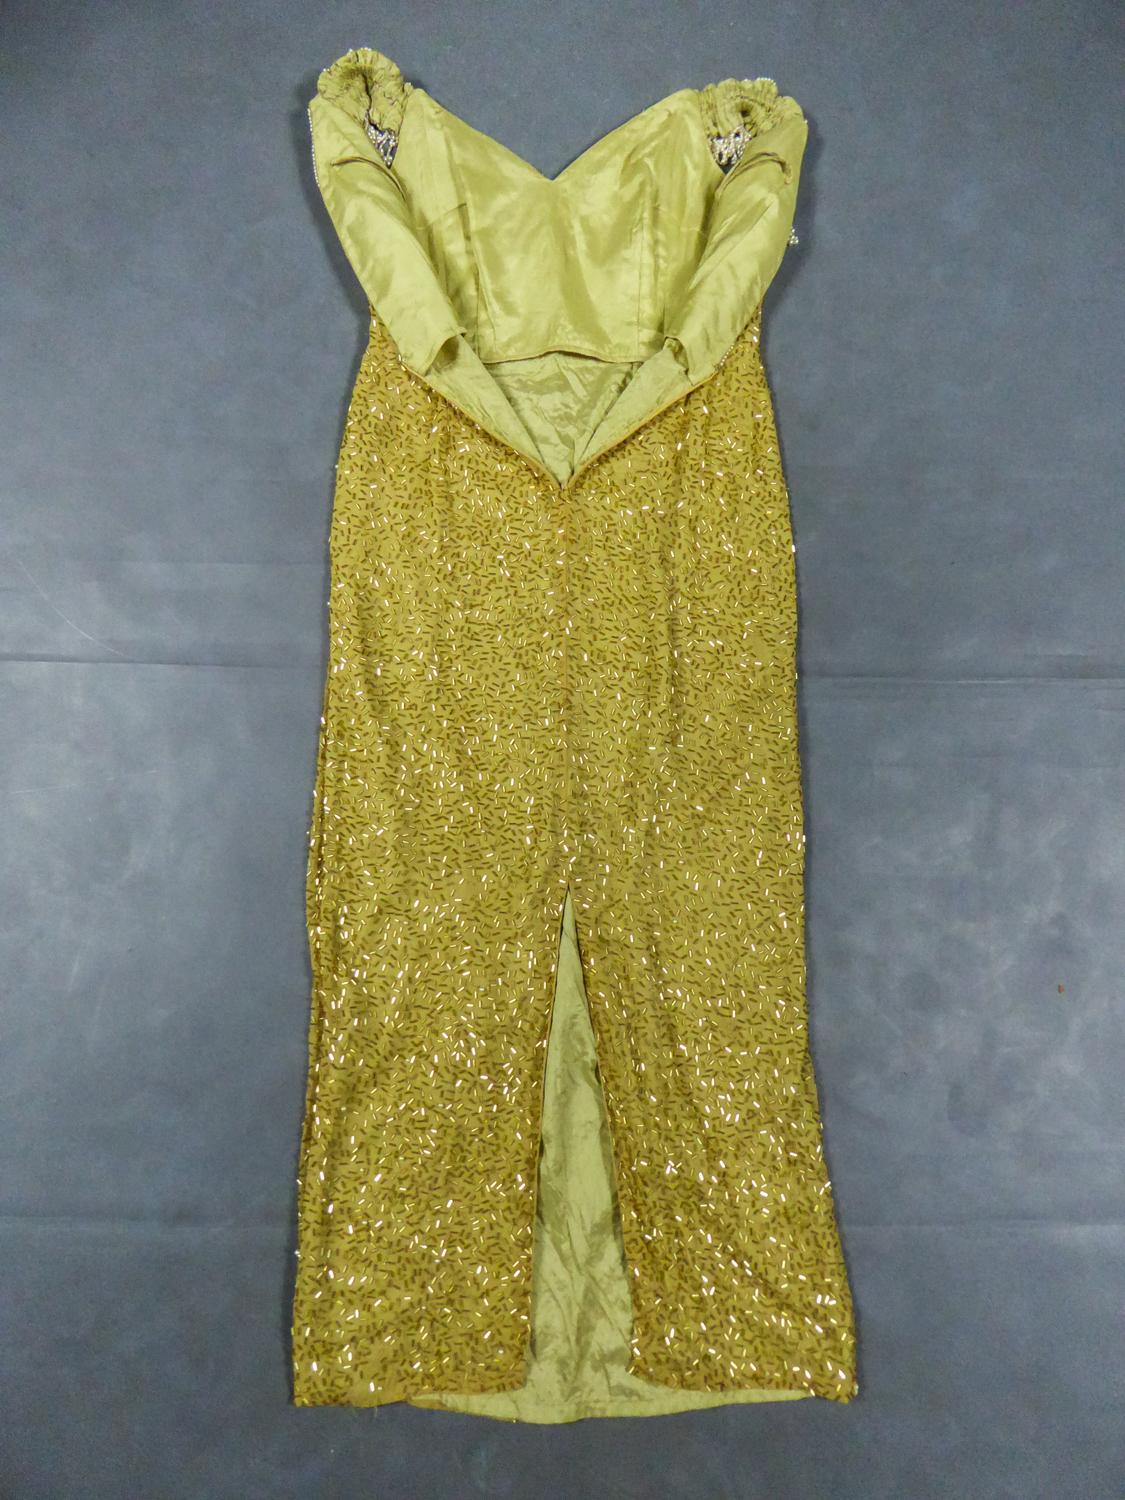 Circa 1980/1990
France

Amazing long evening or Show dress in straw-yellow silk muslin, fully embroidered with gold tubular pearls and cultured pearls from the 1990s. Bustier with rich plunging neckline at the back and decorated with pearls and